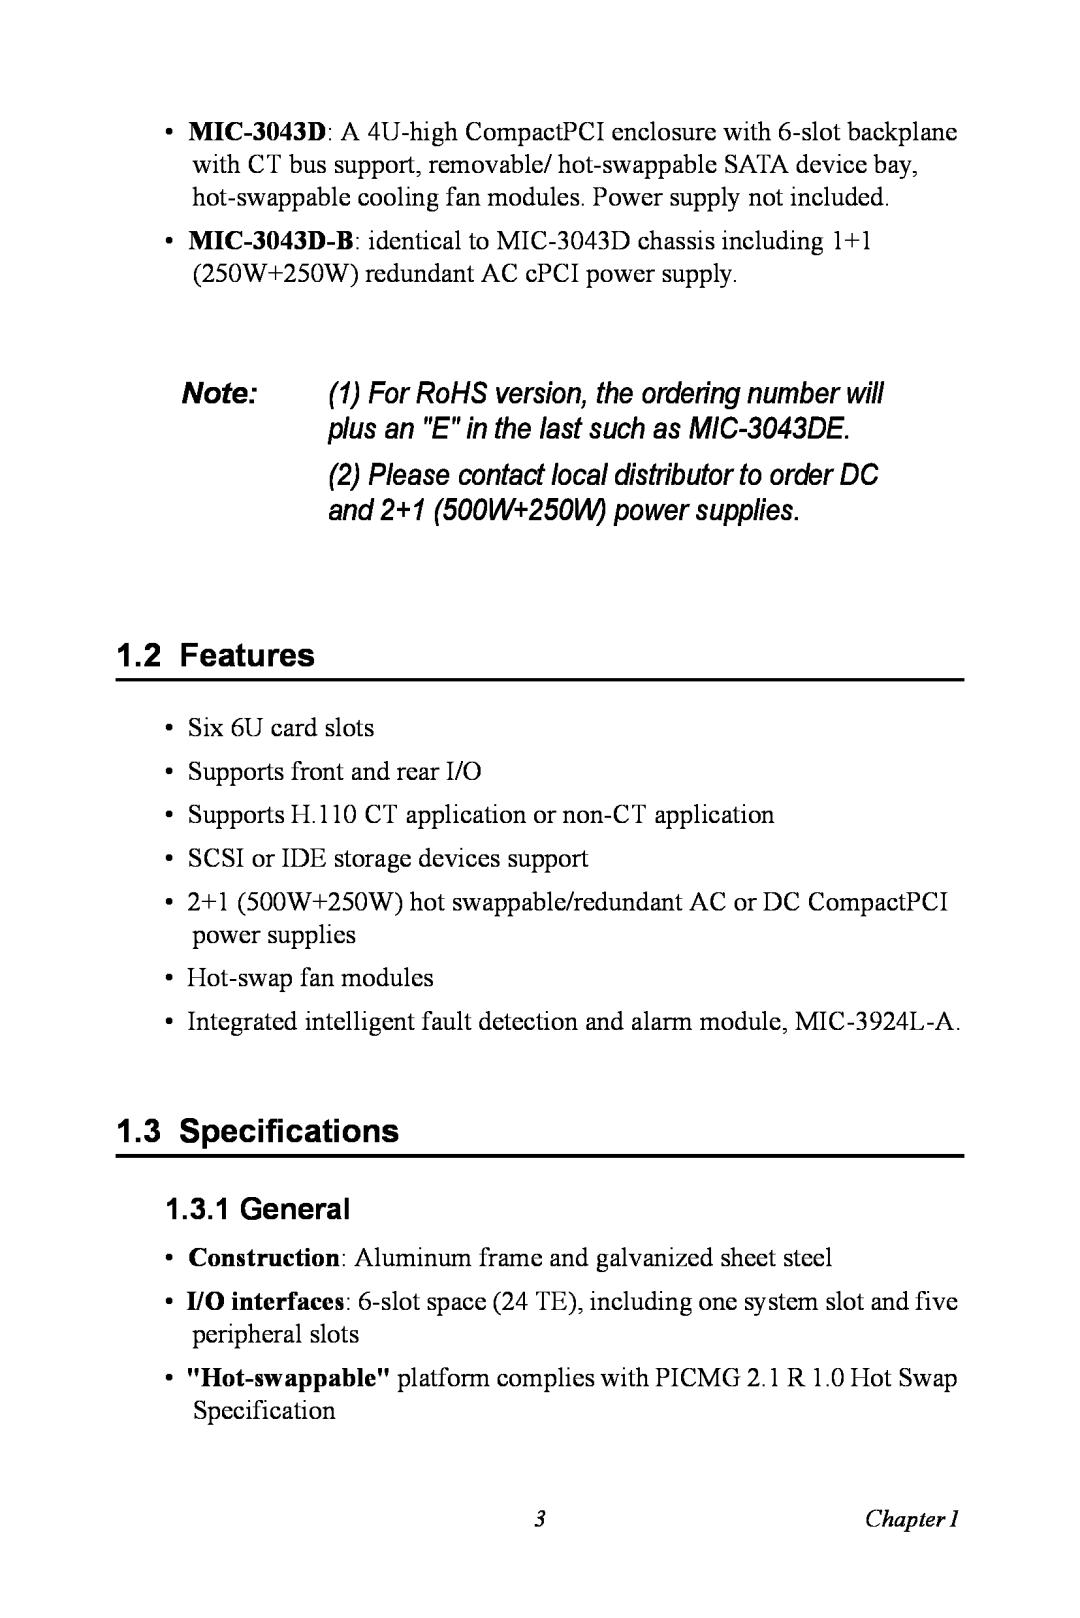 Advantech MIC-3043 user manual Features, Specifications, General 